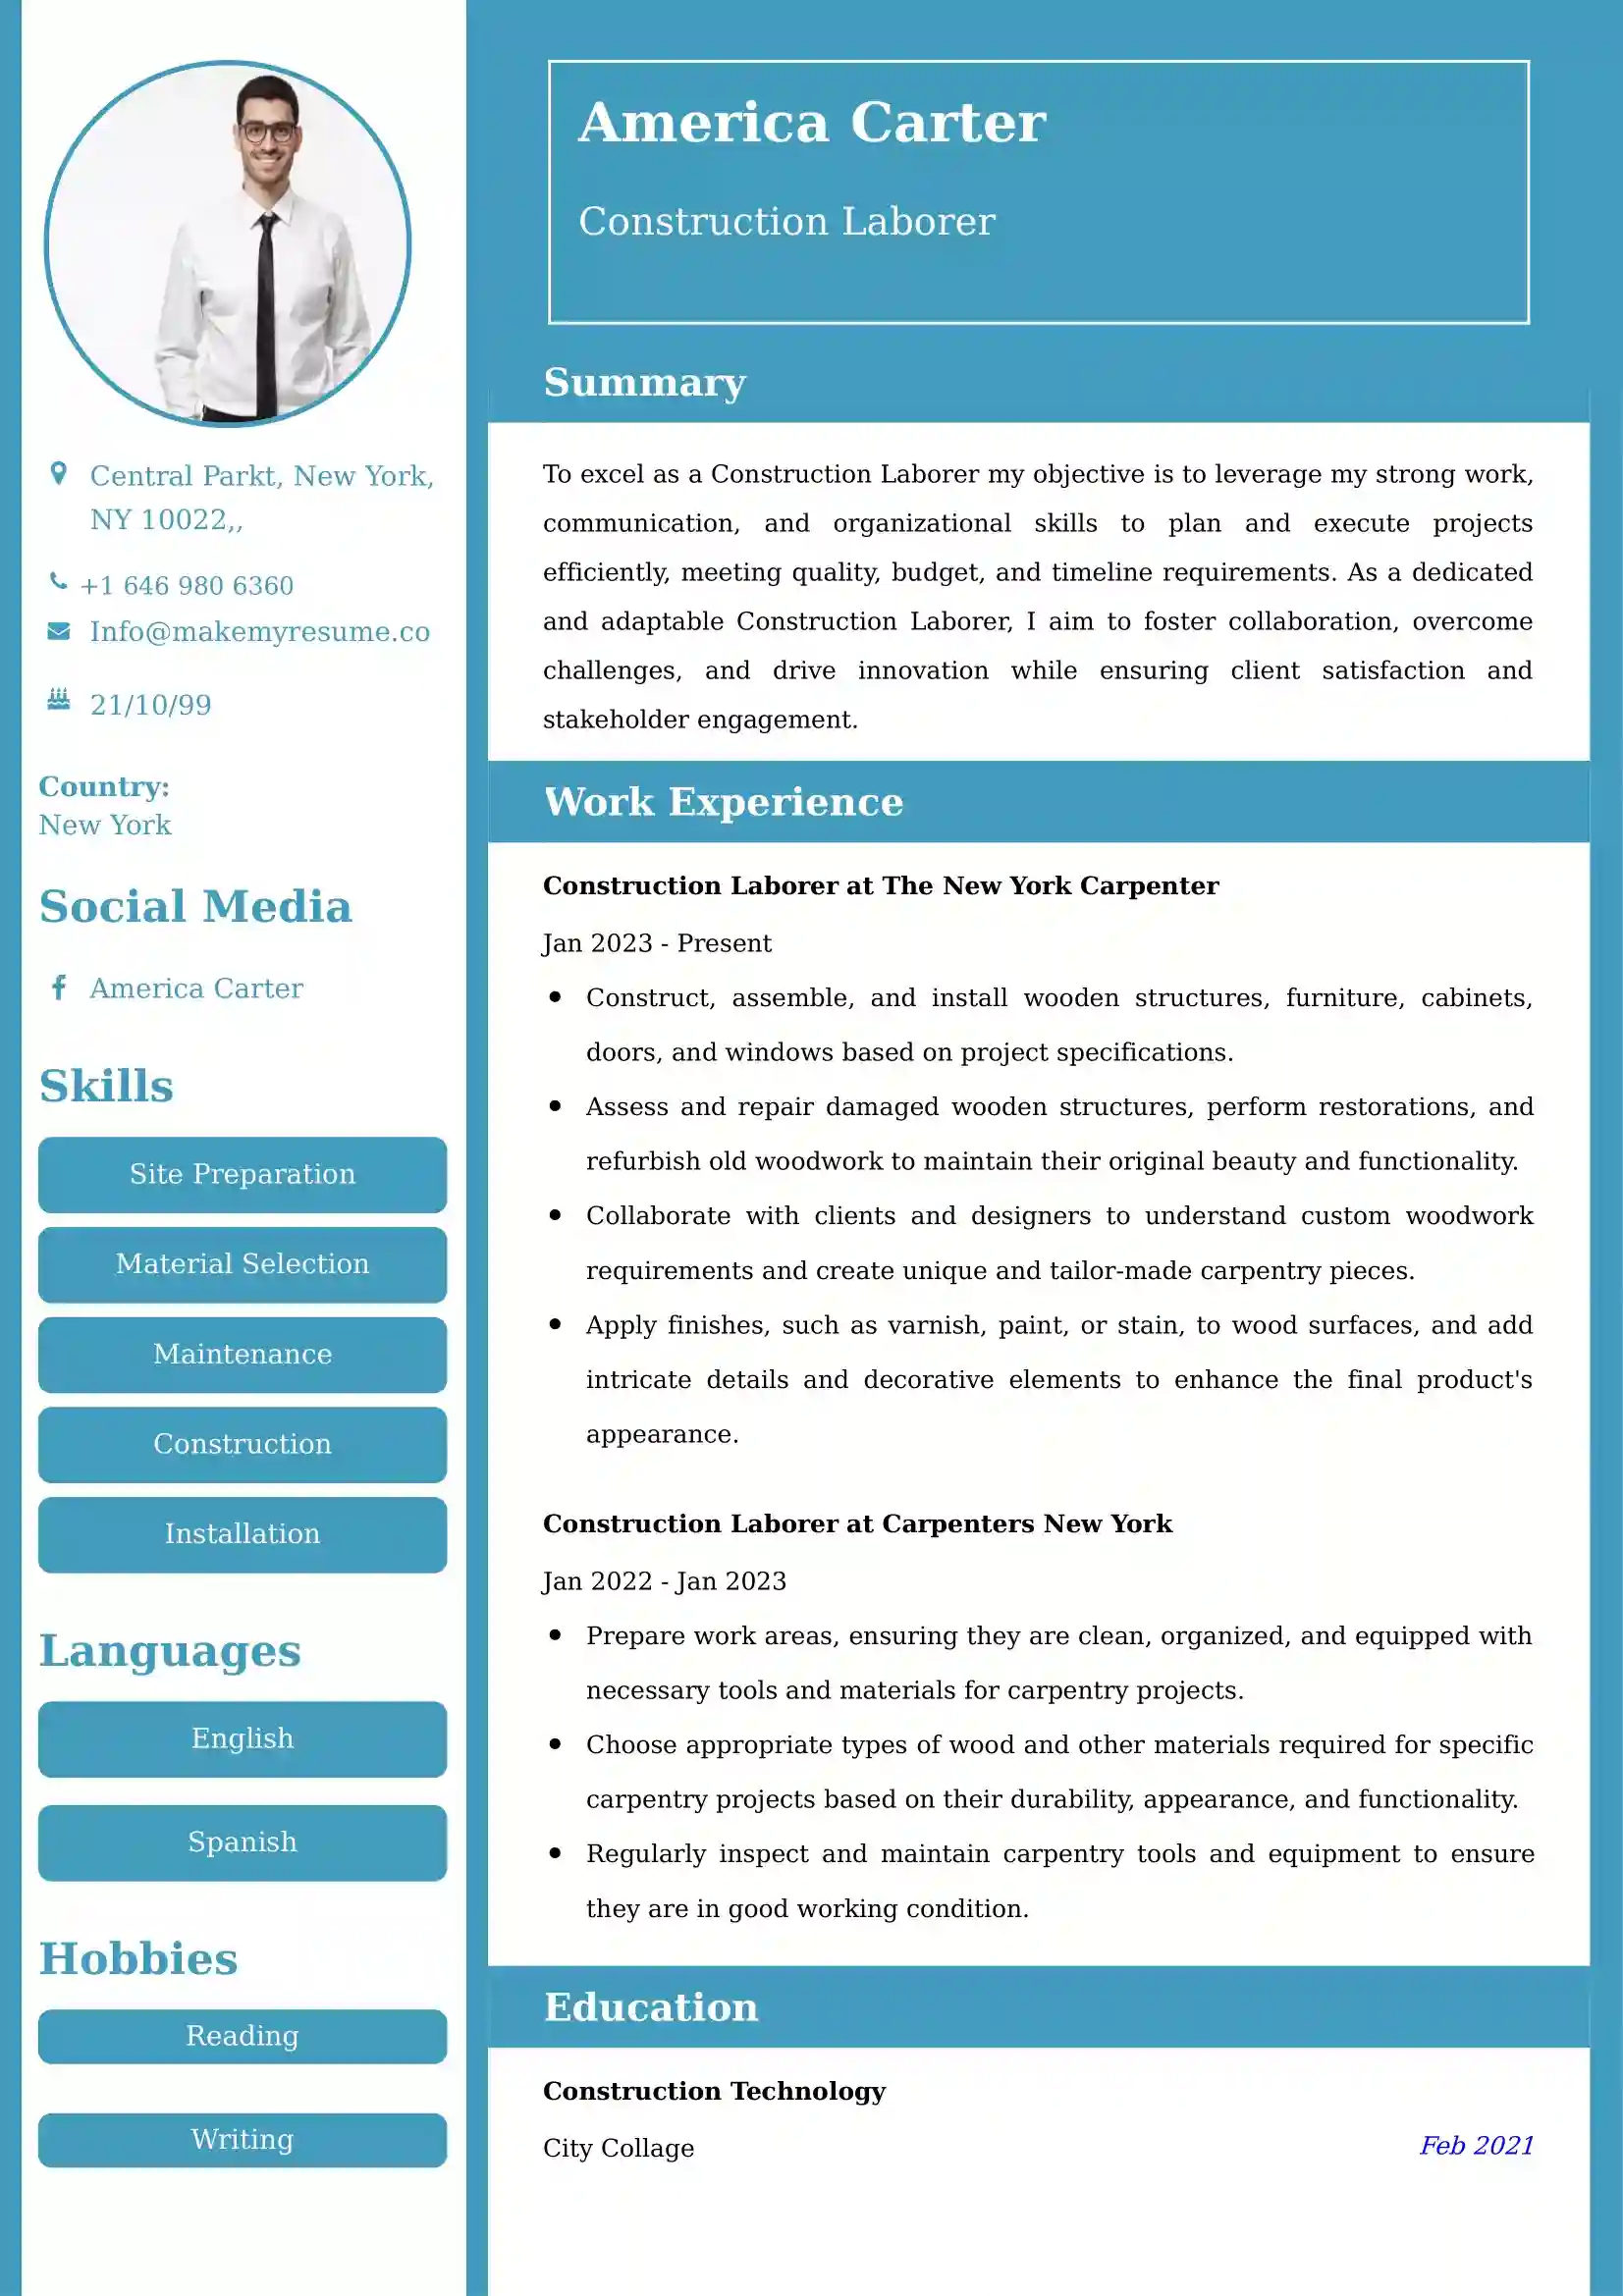 Construction Laborer Resume Examples - UK Format, Latest Template.